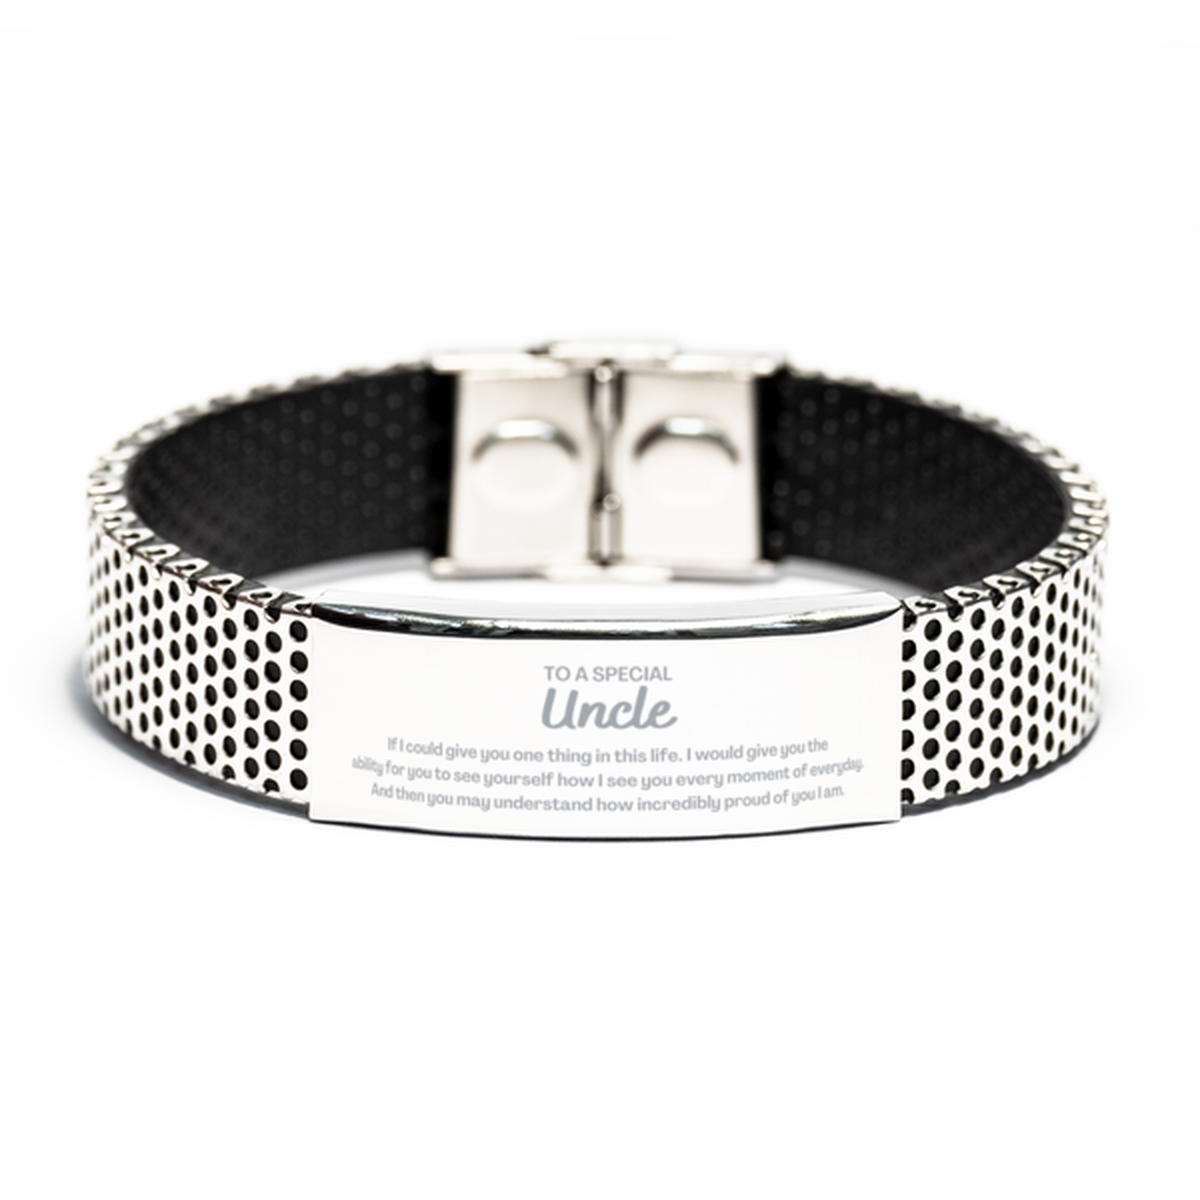 To My Uncle Stainless Steel Bracelet, Gifts For Uncle Engraved, Inspirational Gifts for Christmas Birthday, Epic Gifts for Uncle To A Special Uncle how incredibly proud of you I am